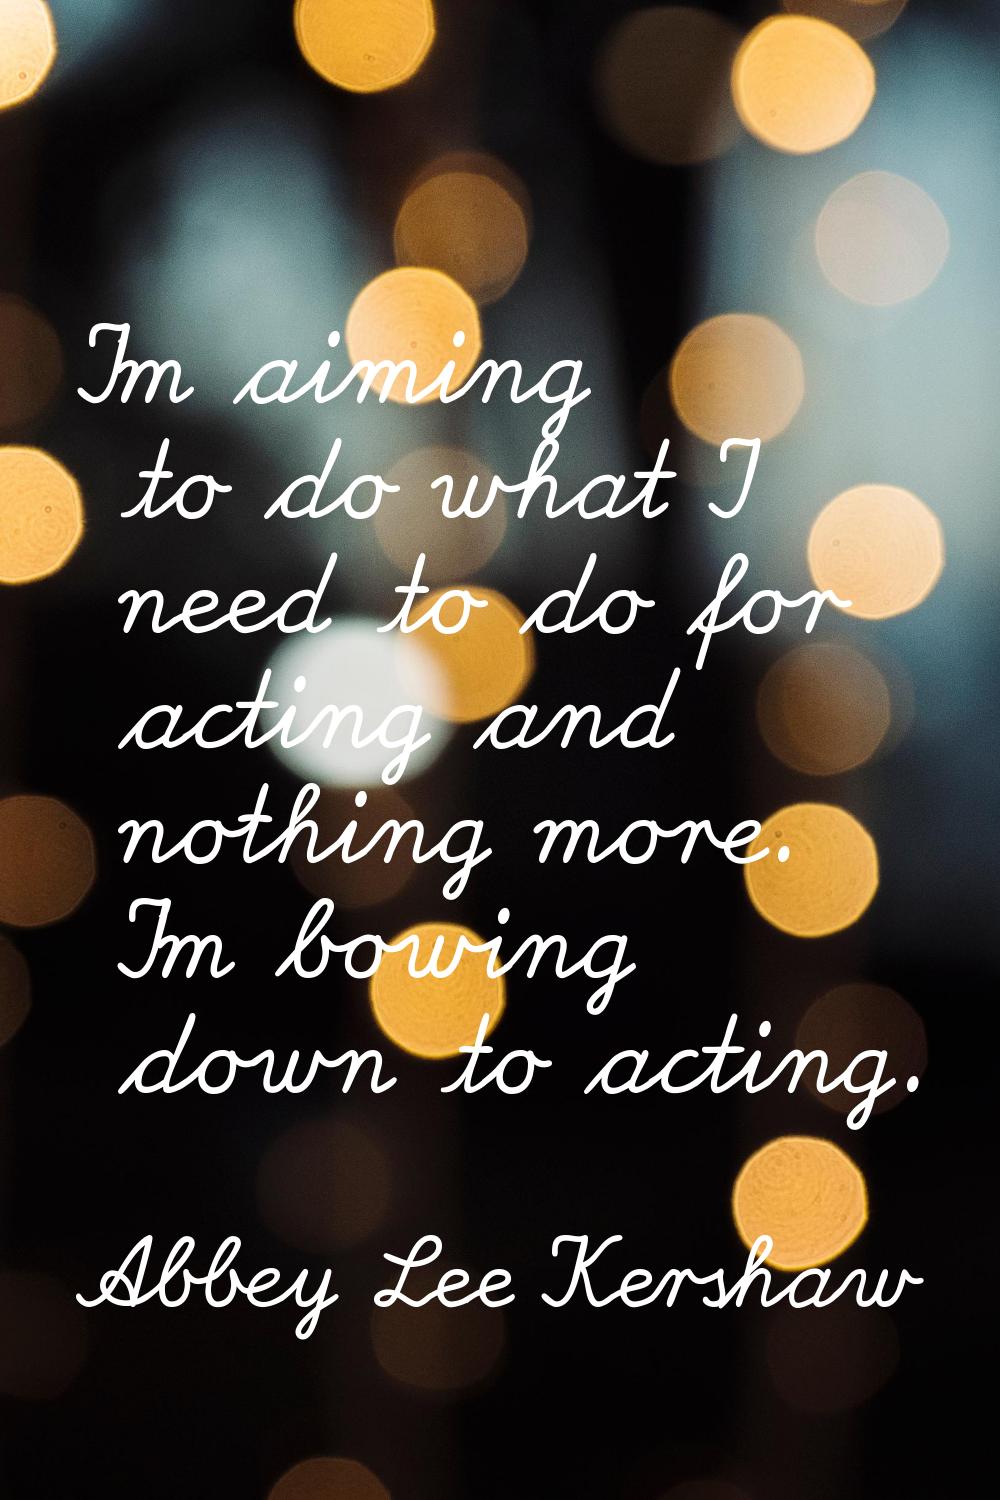 I'm aiming to do what I need to do for acting and nothing more. I'm bowing down to acting.